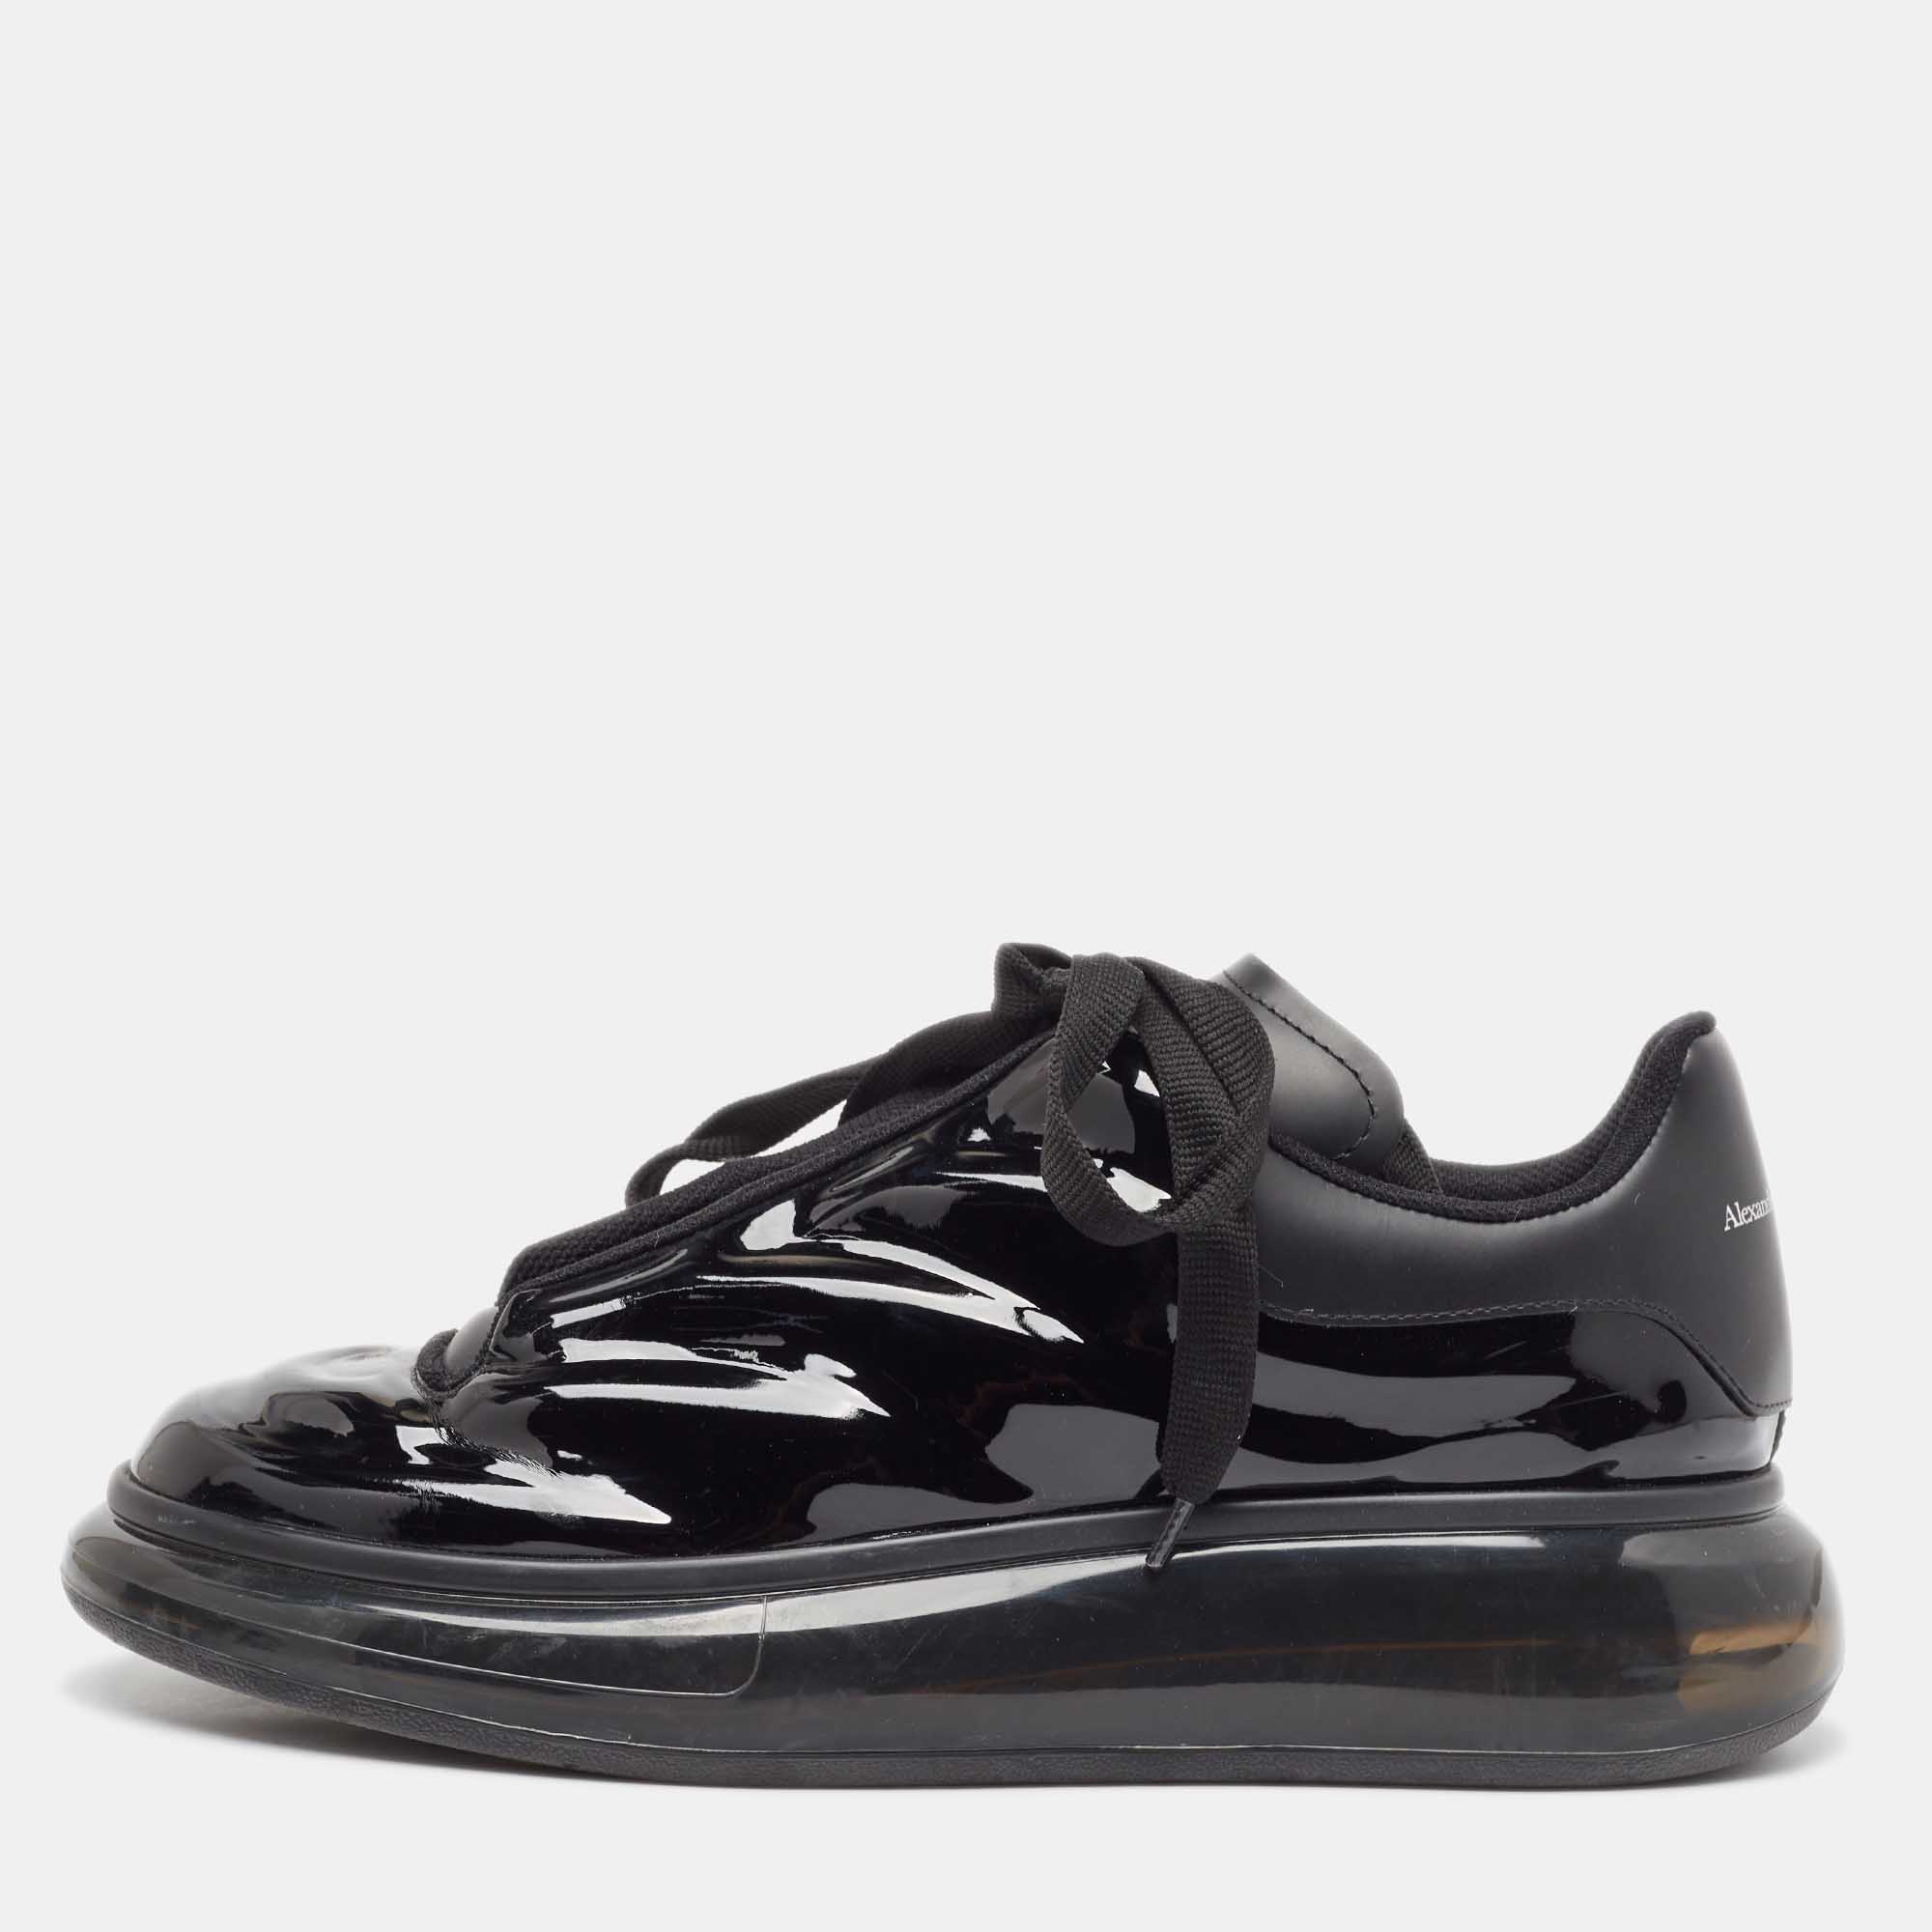 

Alexander McQueen Black Patent and Leather Oversized Sneakers Size